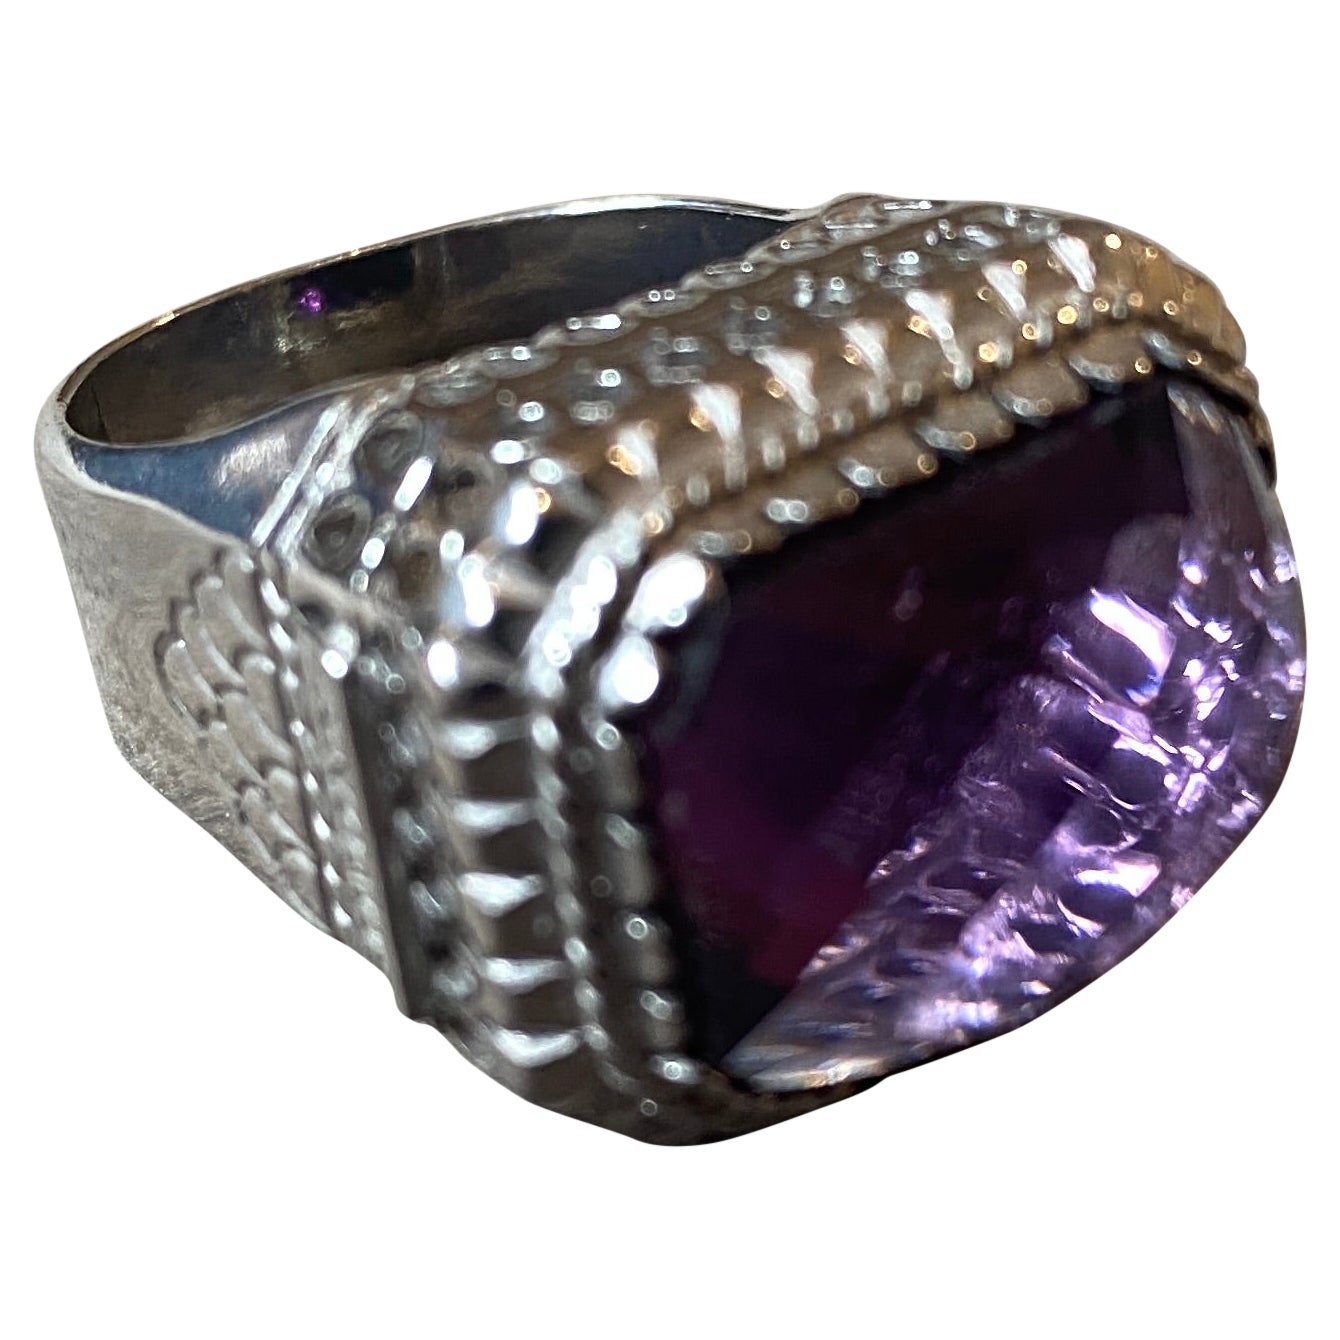 A 1990s Retro Sterling Silver and Hydrothermal Quartz Italian Cocktail Ring